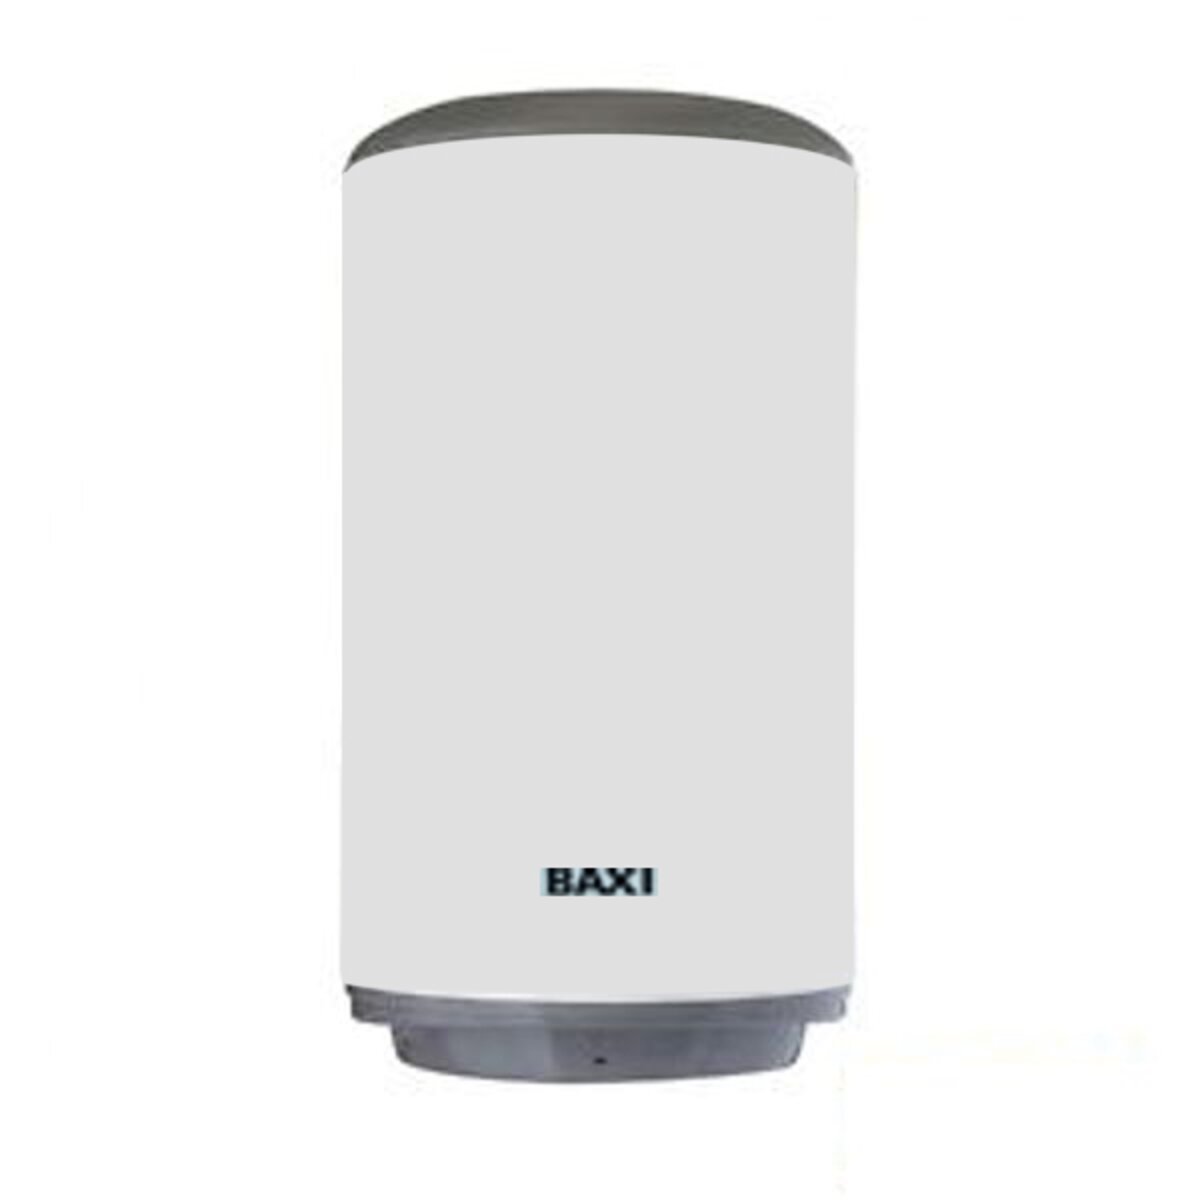 Electric water heater ExtrA + Baxi r201 line 10 liters sink 2 years